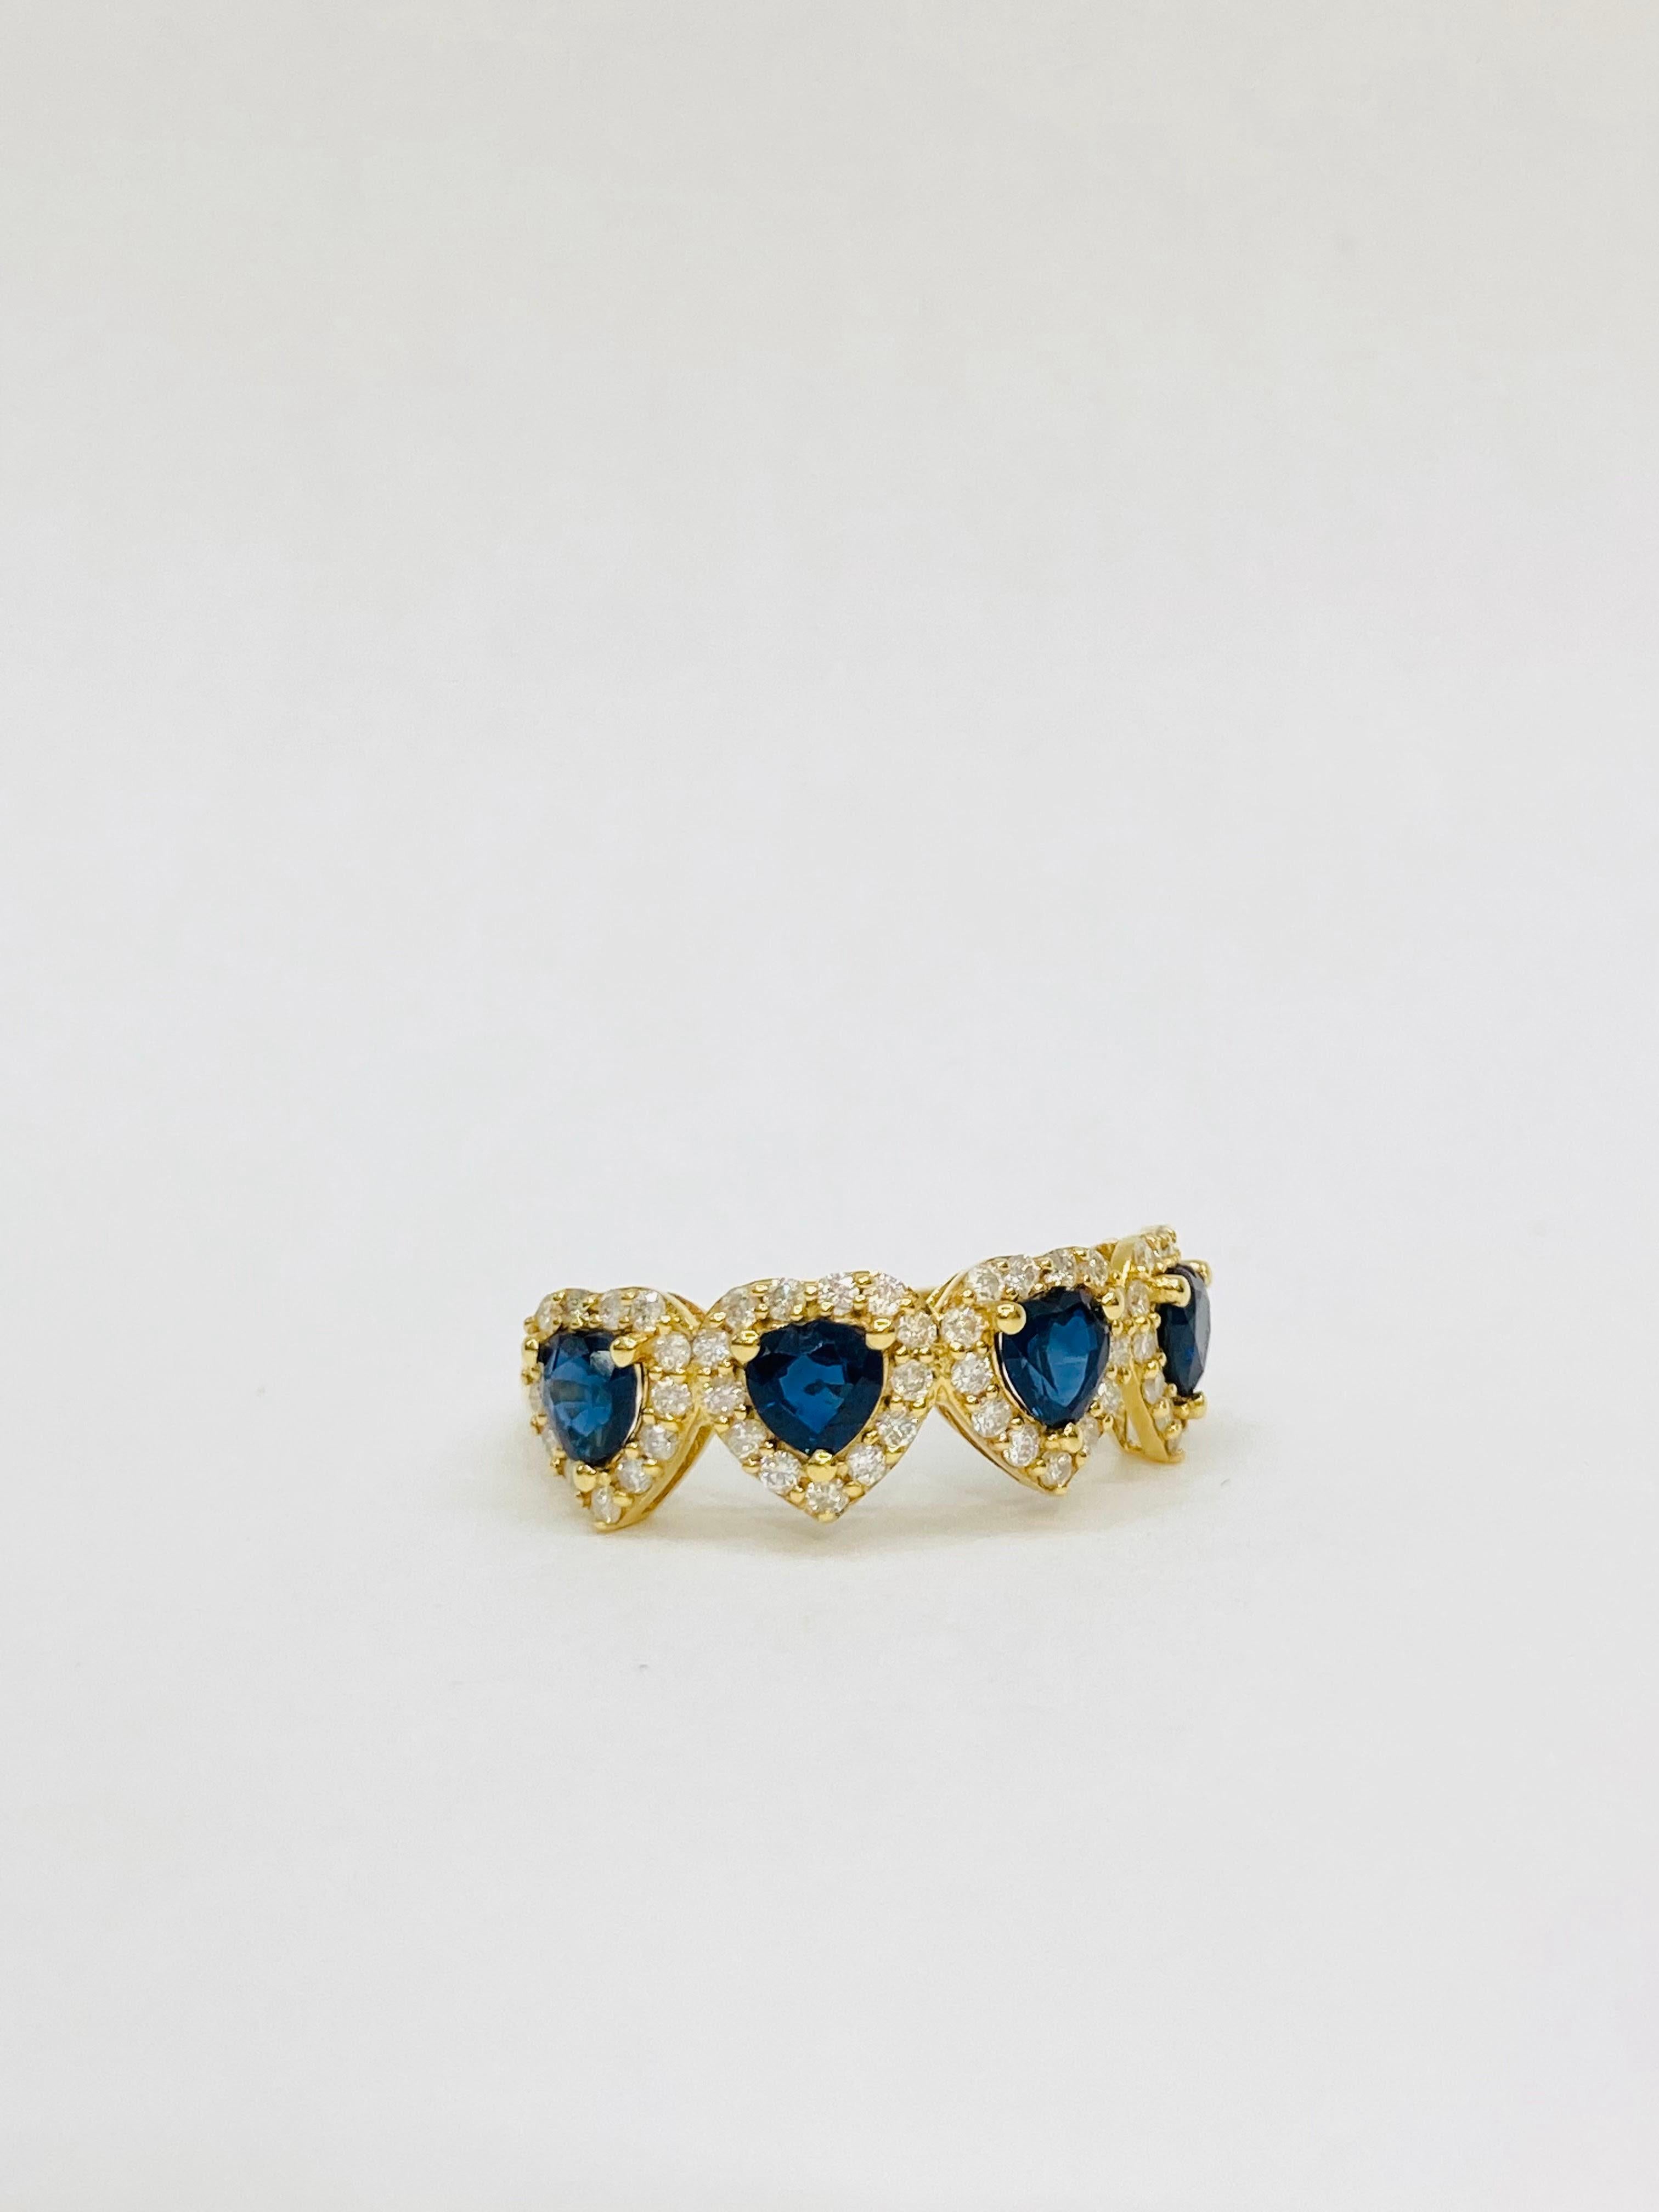 Bochic “Retro Vintage” Sapphire & Diamond  18K Gold & Eternity Cluster Ring.
Natural Blue Sapphire from Sri Lanka  2,00 Carat 
Heart Shapes 
Diamonds 0.45 Carat 
Round Brilliant
F color 
VS clarity 
18K Yellow Gold
3.00 Gram

This Ring is from the